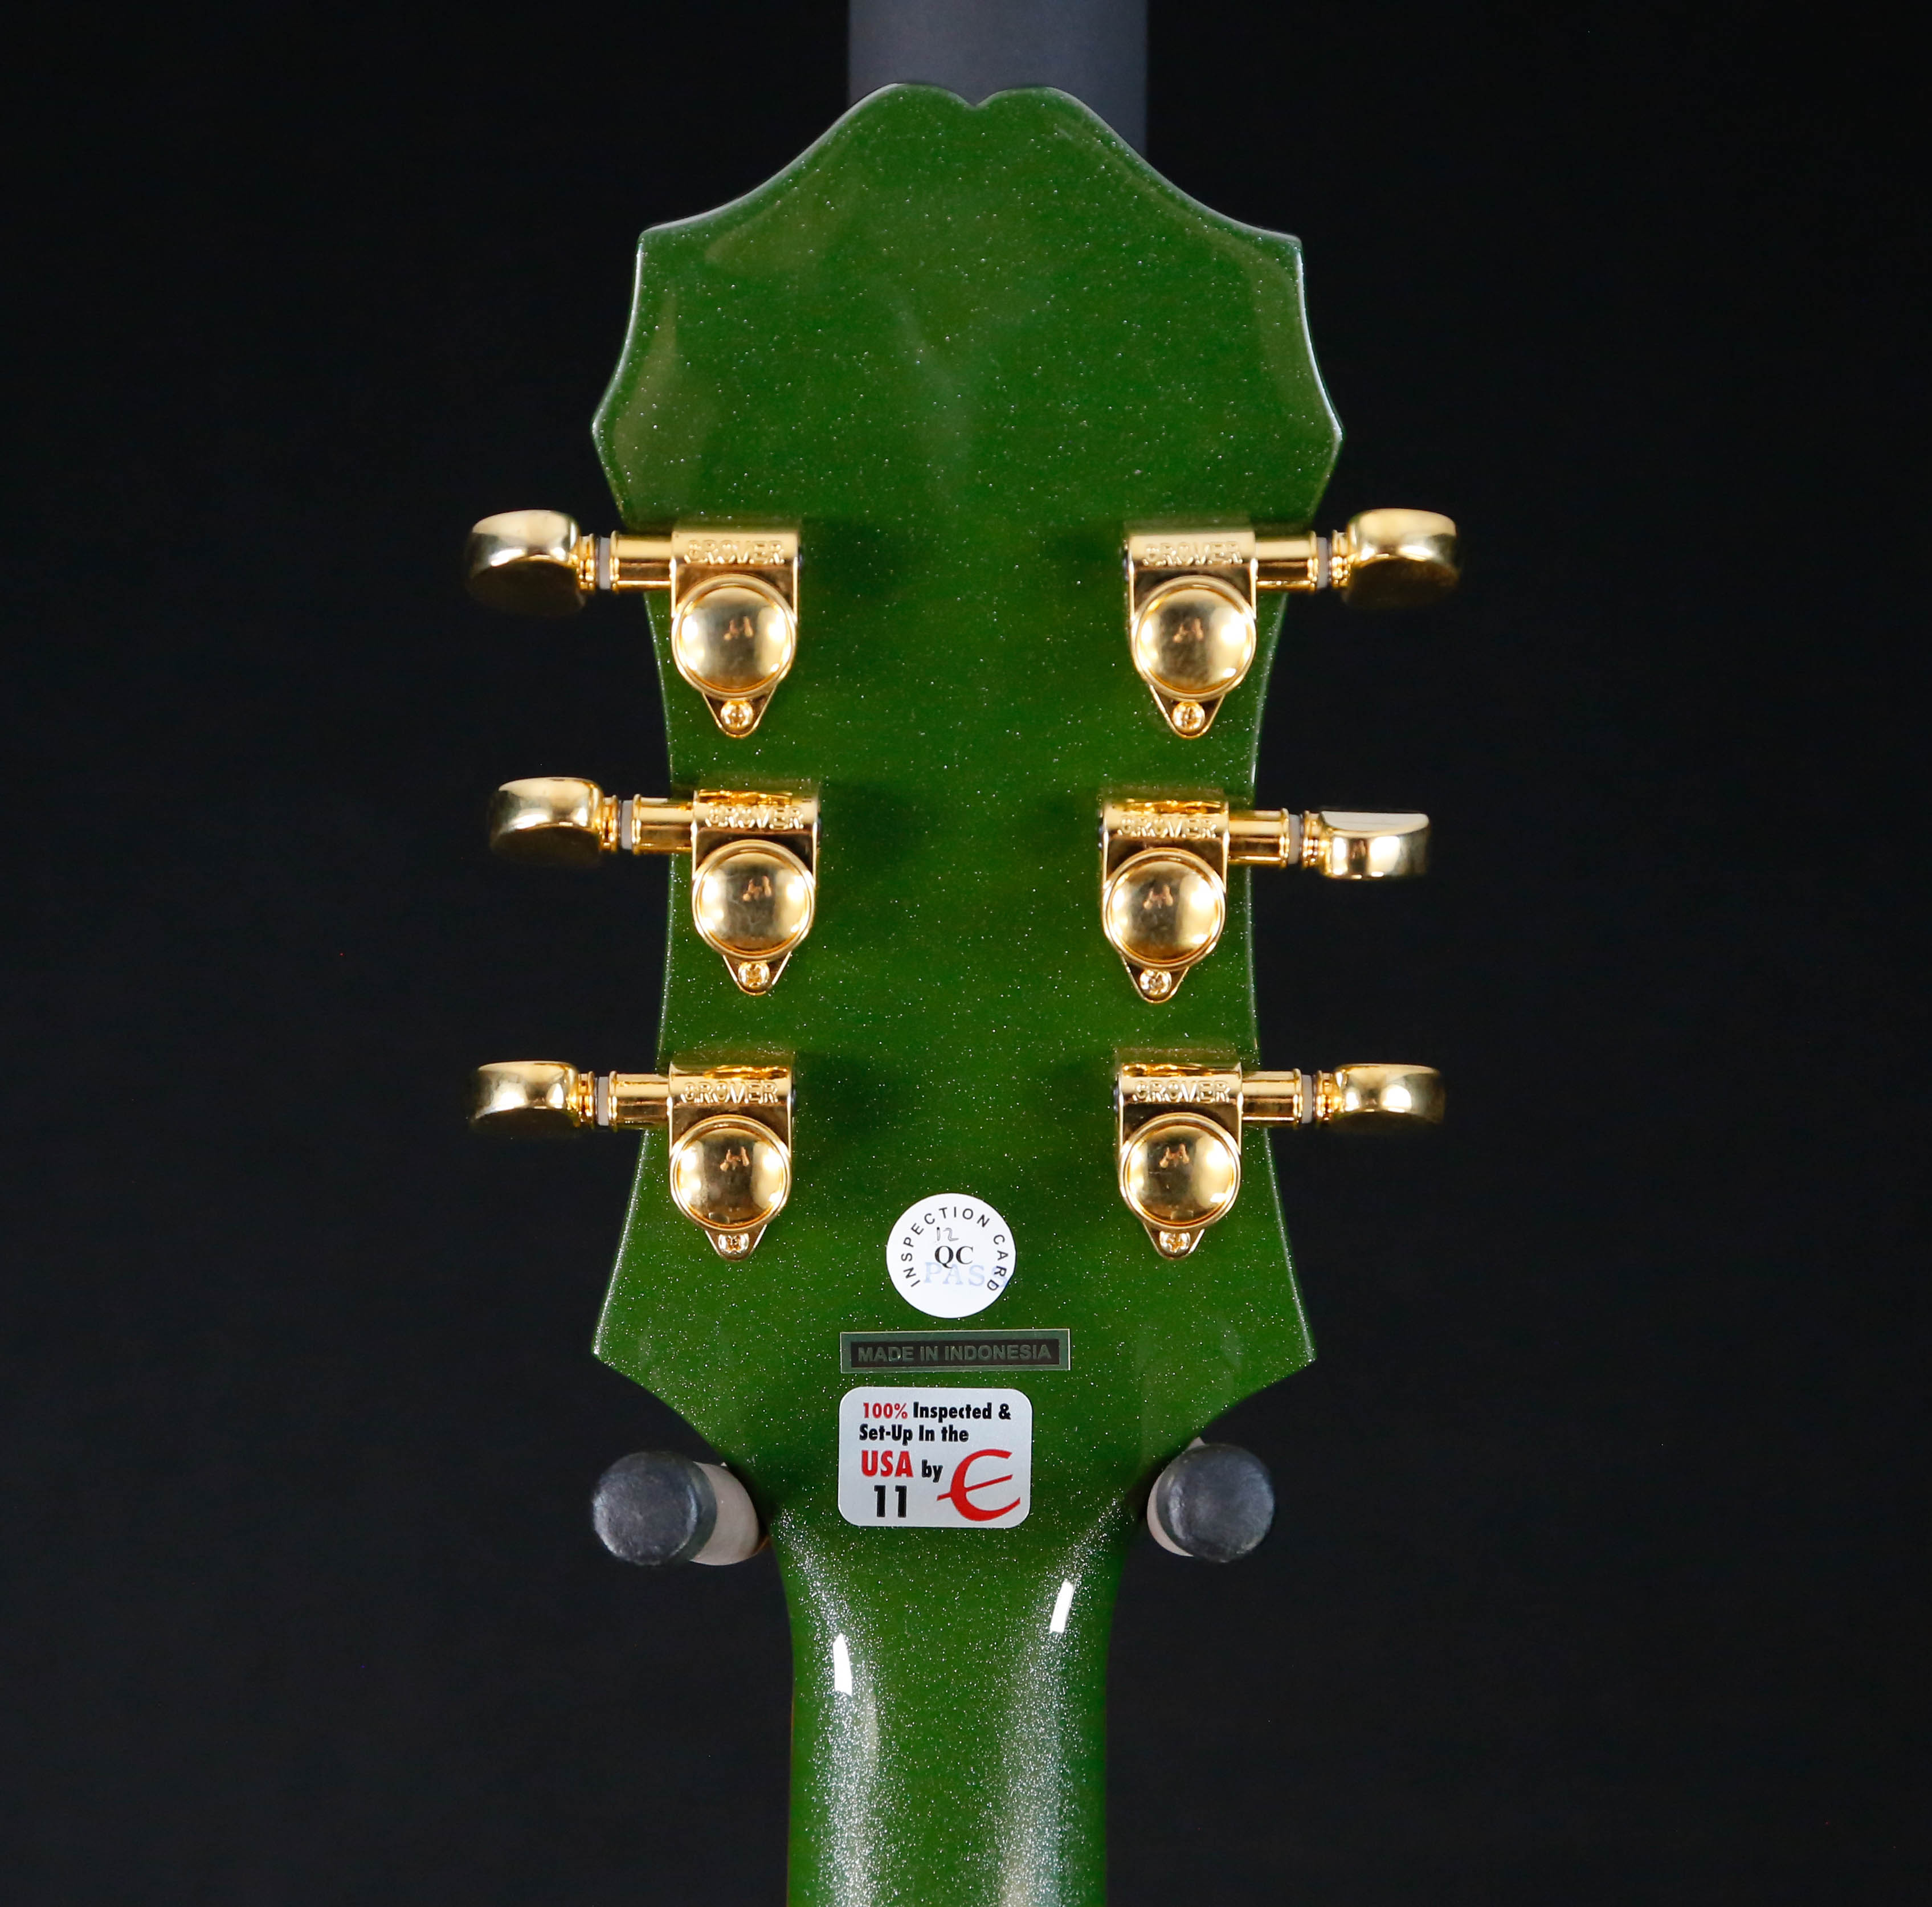 Epiphone Emperor Swingster Hollowbody, Forest Green Metallic